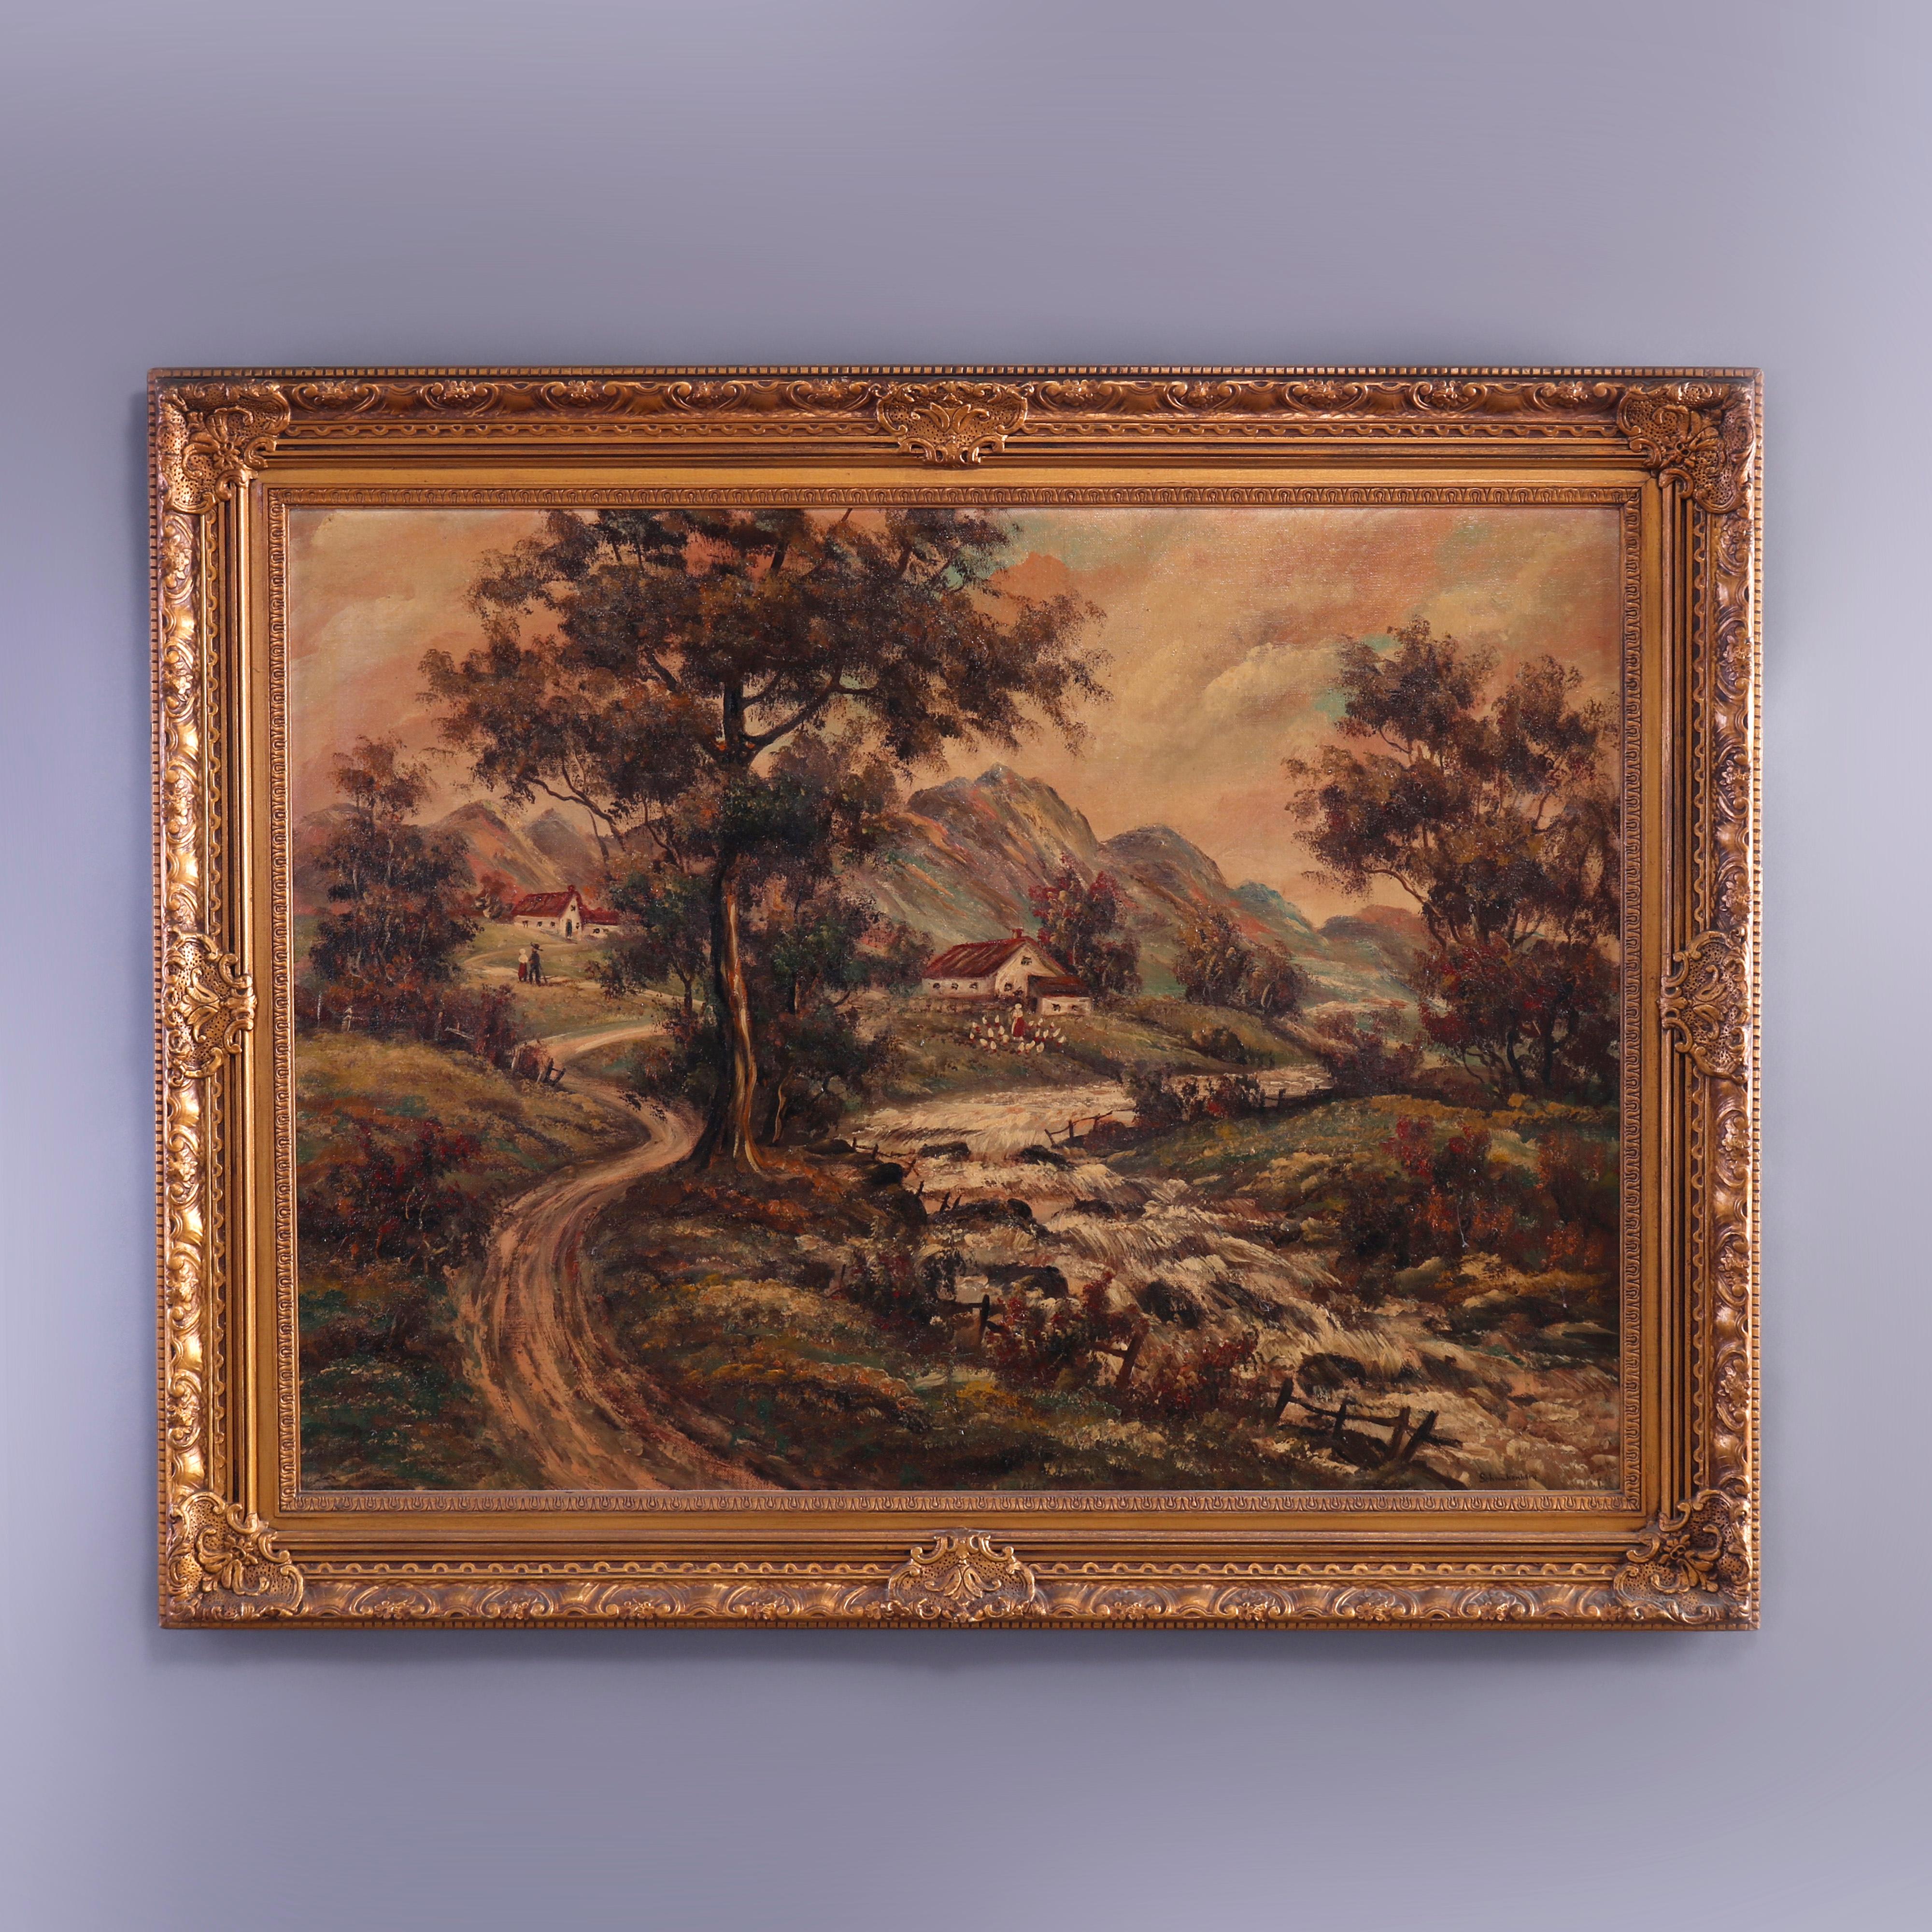 An oversized antique painting offers pastoral landscape scene with village, country road, figures and mountainous background, seated in giltwood frame, c1930

Measures - overall 37.75''H x 47.5''W x 2''D.
  